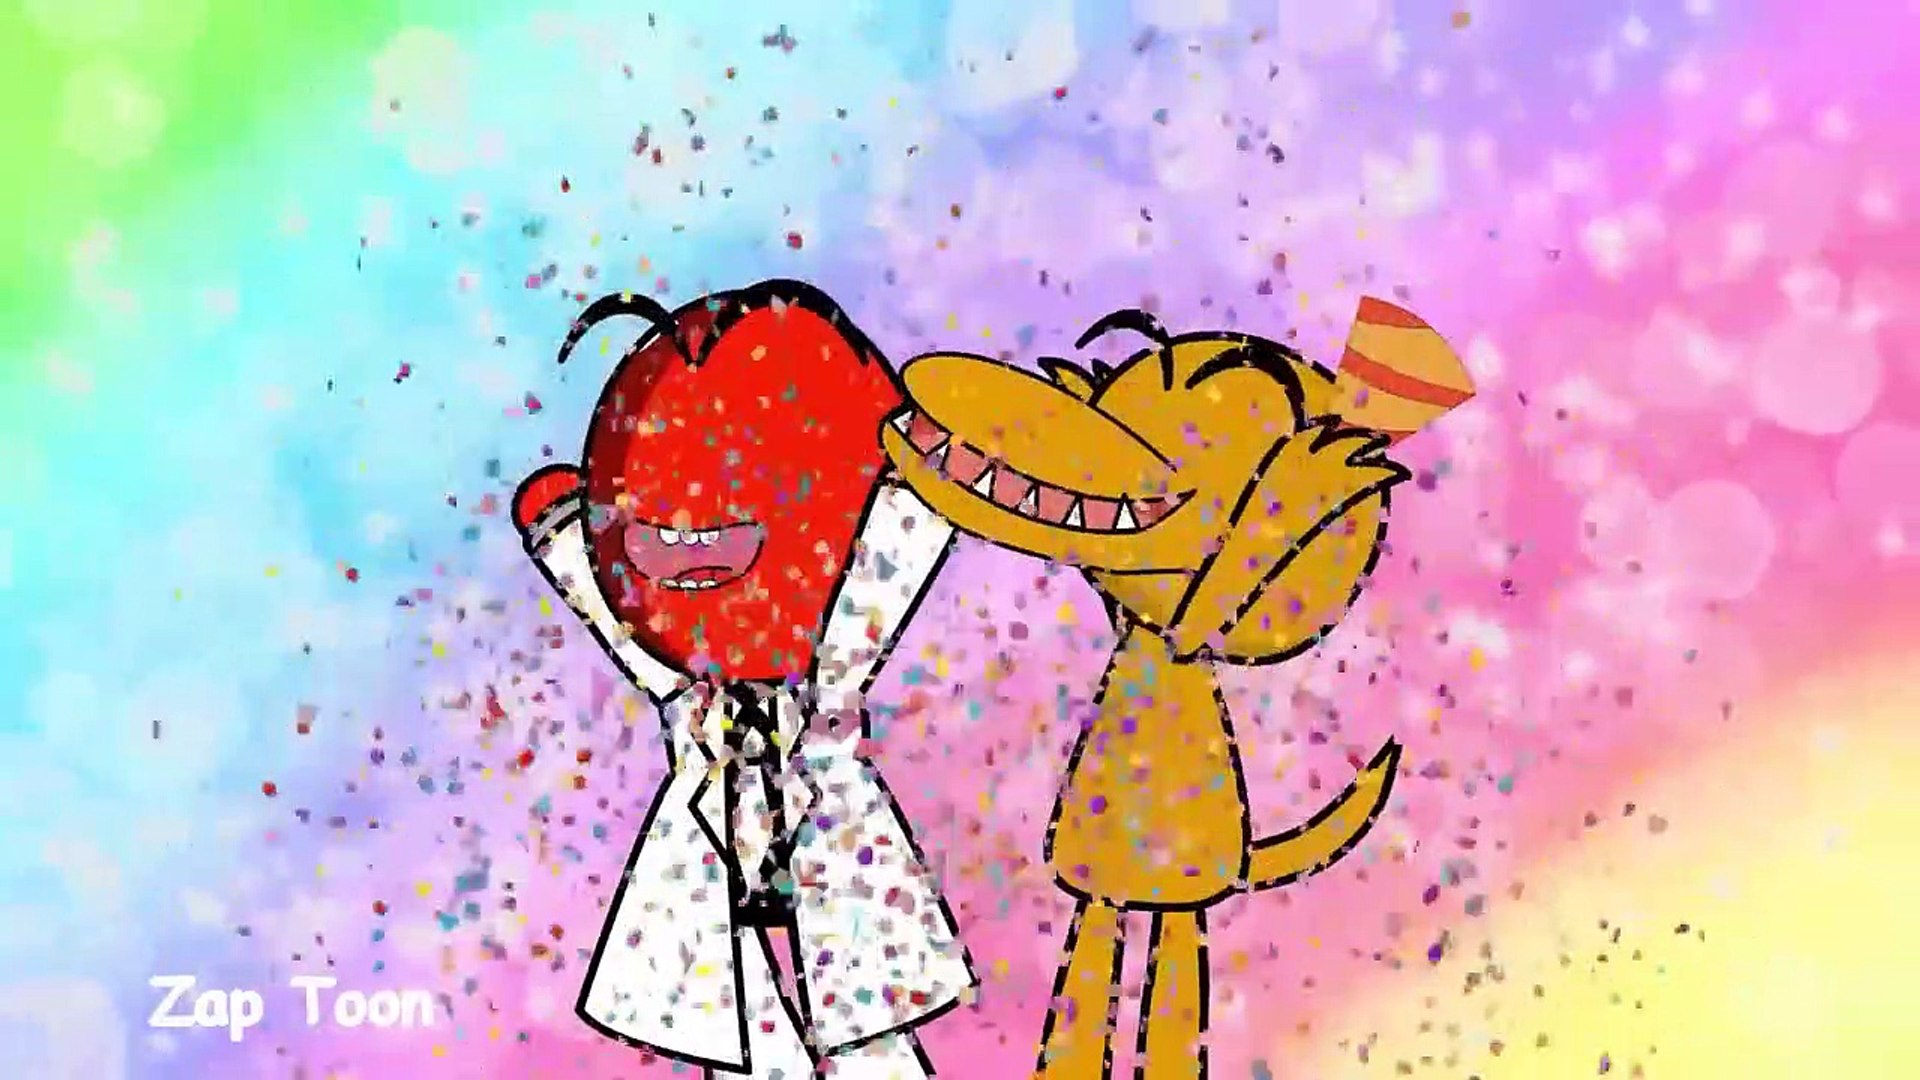 Rainbow Friends Blue x Green Has A Baby - Family Love Story - Rainbow  Friends Animation - video Dailymotion